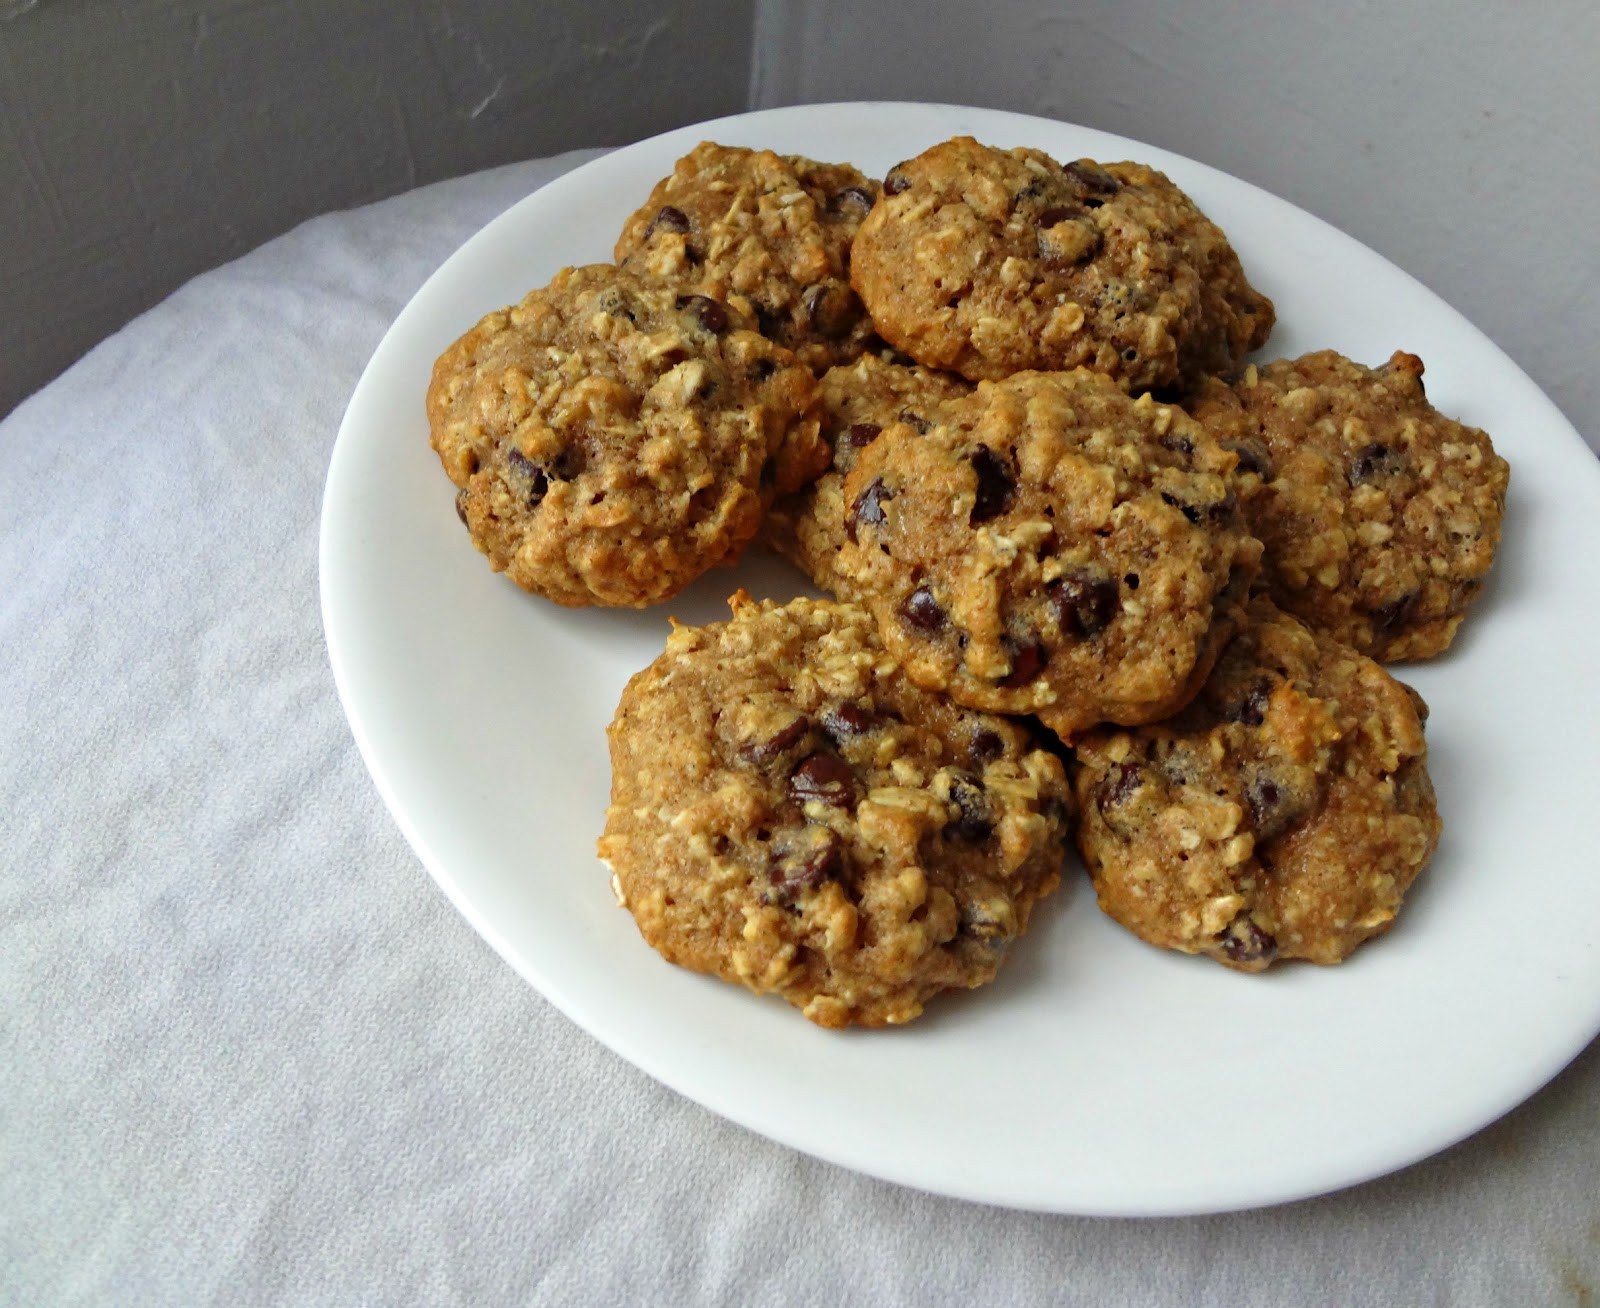 Cocoa Oatmeal Cookies Healthy
 The Cooking Actress Healthy Oatmeal Chocolate Chip Cookies